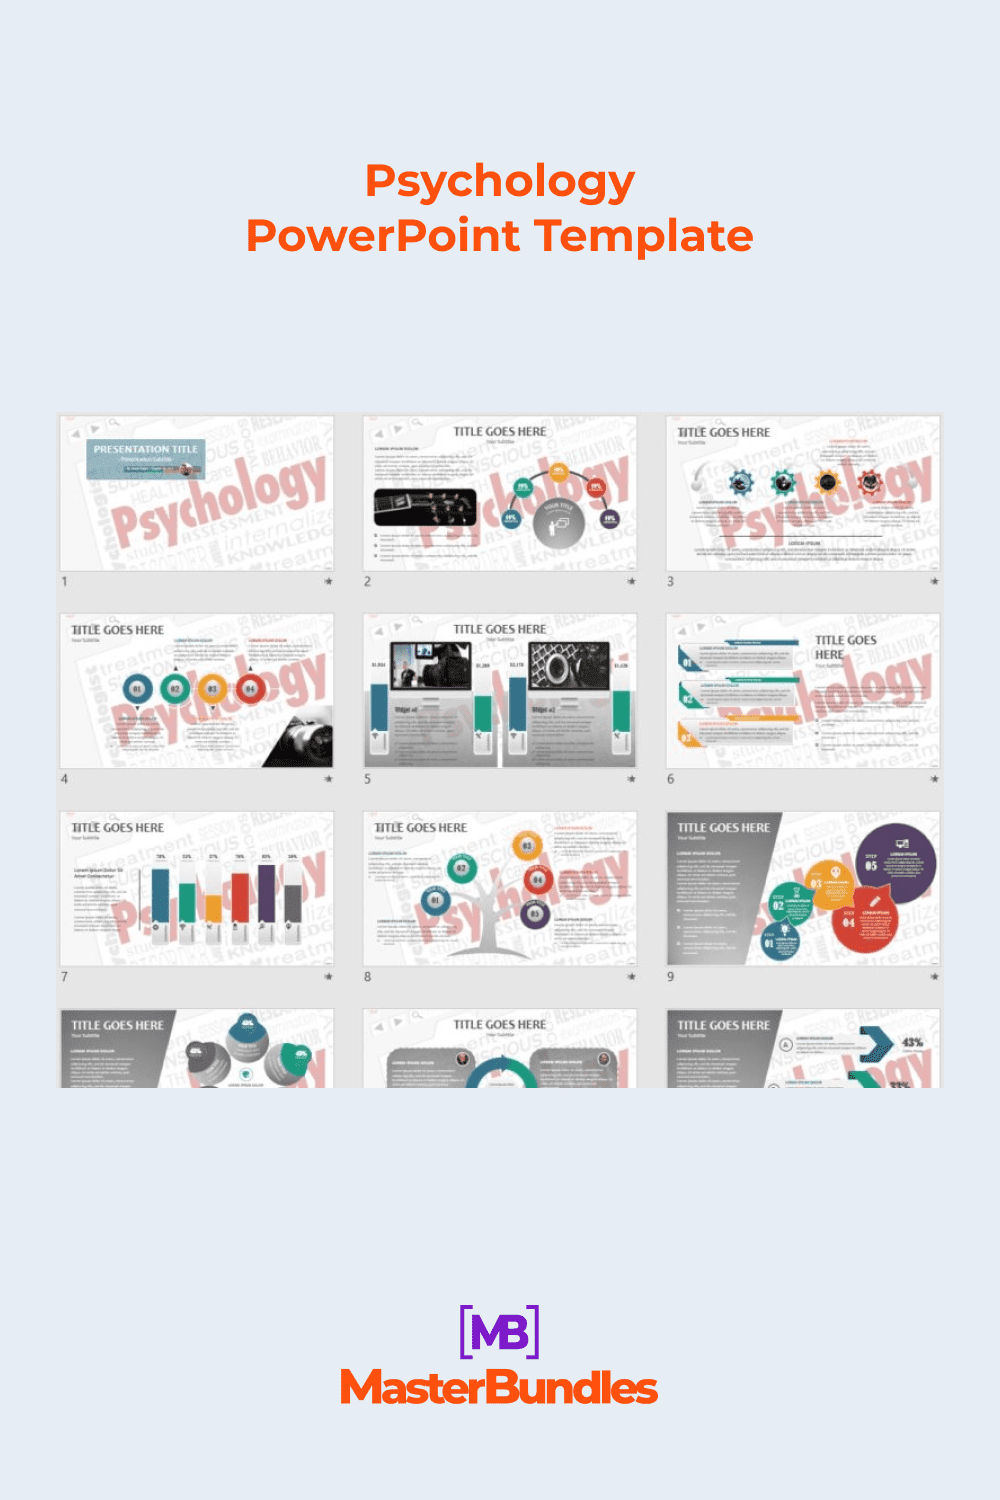 Psychology powerpoint template.